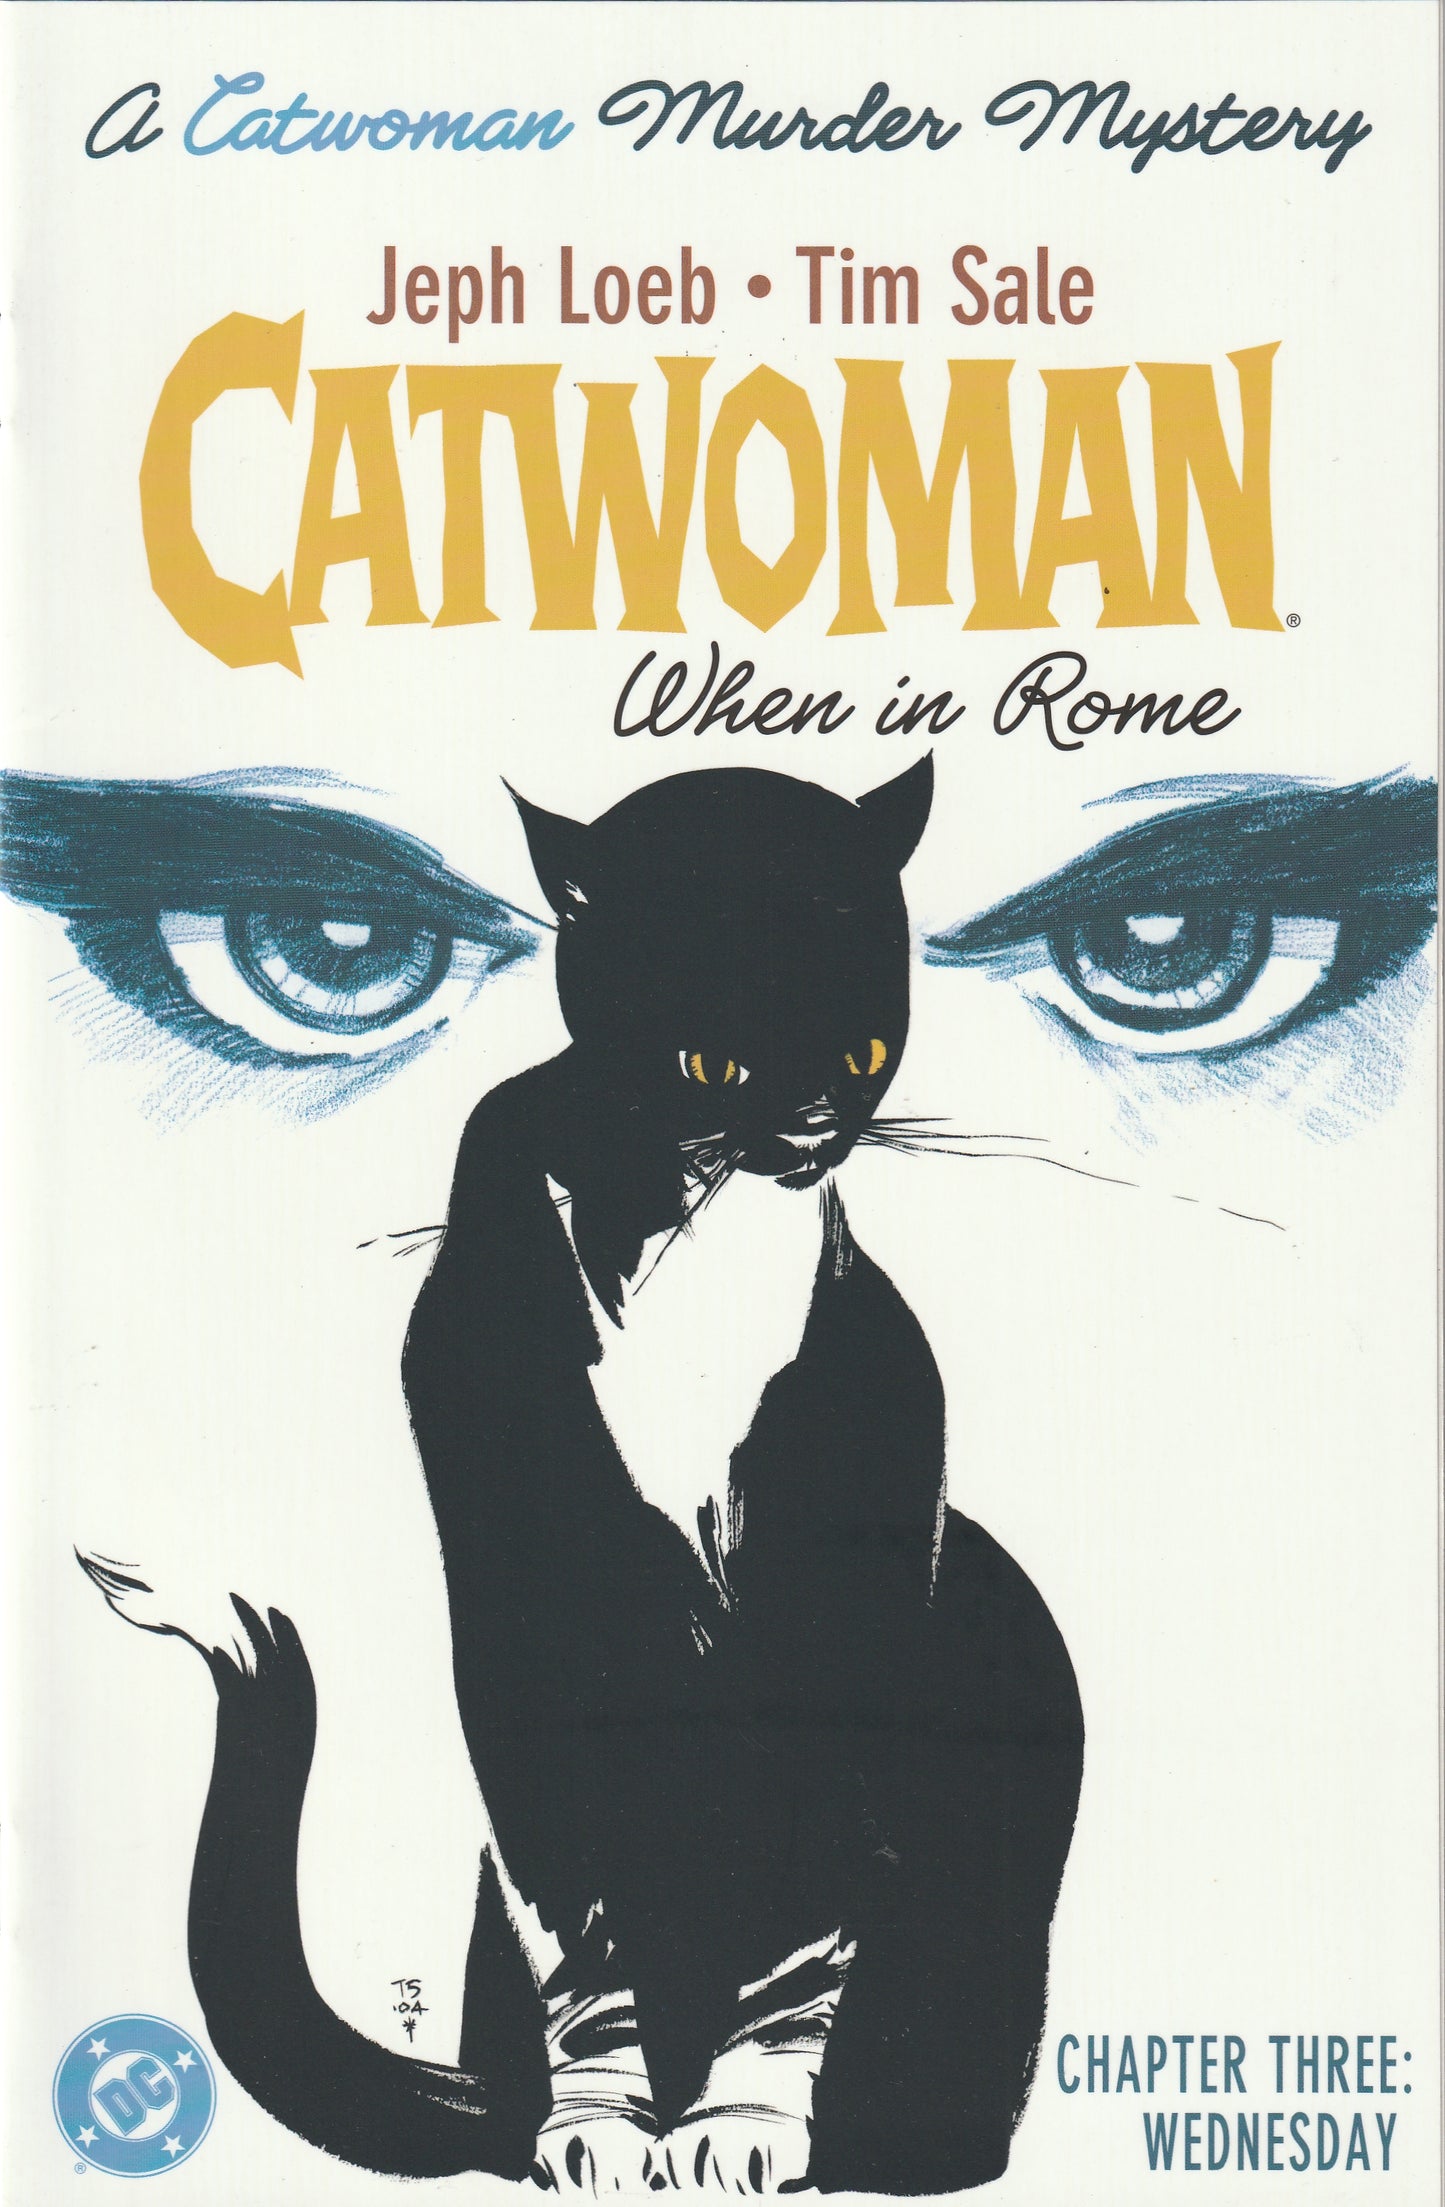 Catwoman: When in Rome (2004-2005) - Complete 6 issue mini-series